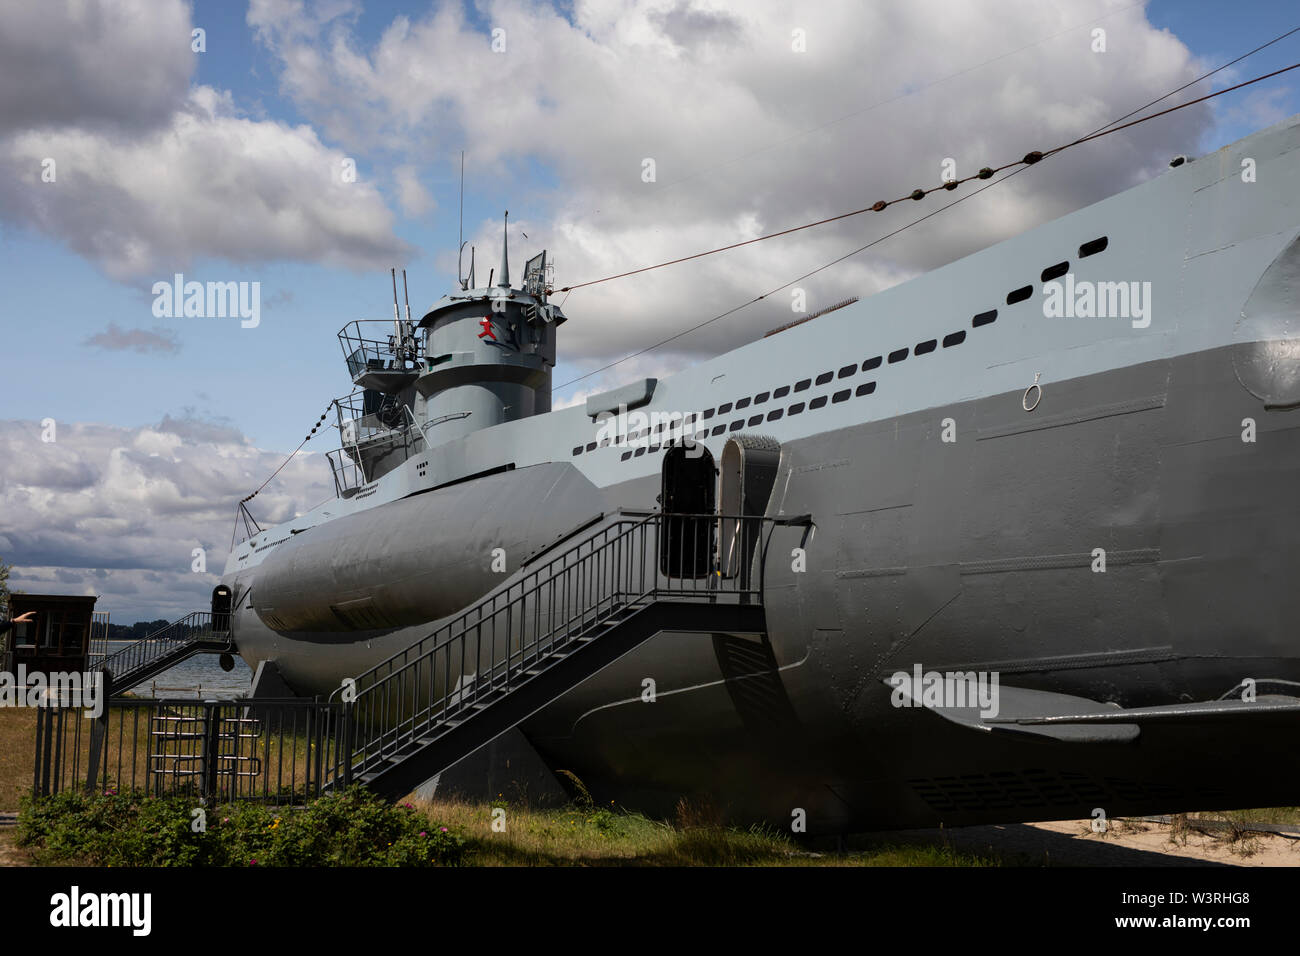 The German submarine U-995 is a Type VIIC/41 U-boat of Nazi Germany's Kriegsmarine, now open as a museum in Laboe, Germany, on the Baltic Sea. Stock Photo